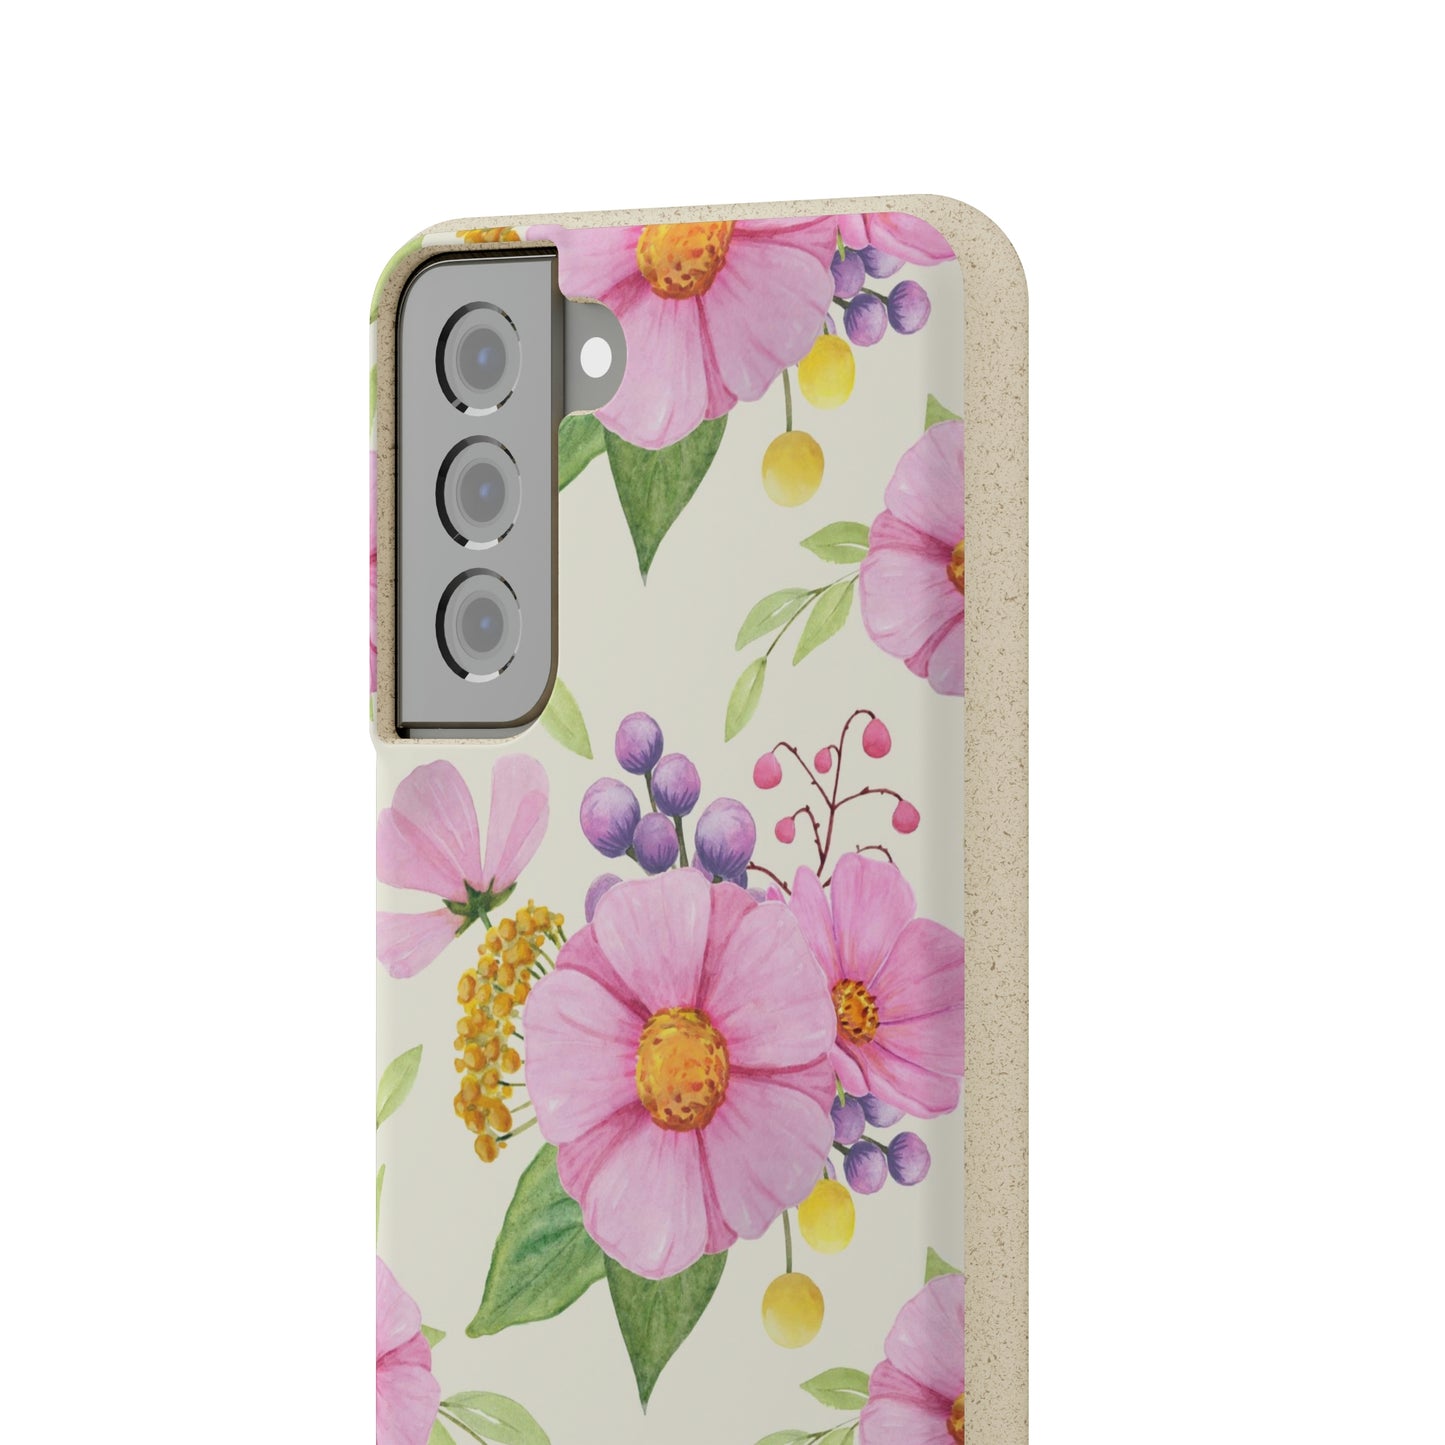 Floral Eco-Friendly Biodegradable Phone Case: Protect Your Device & the Planet"